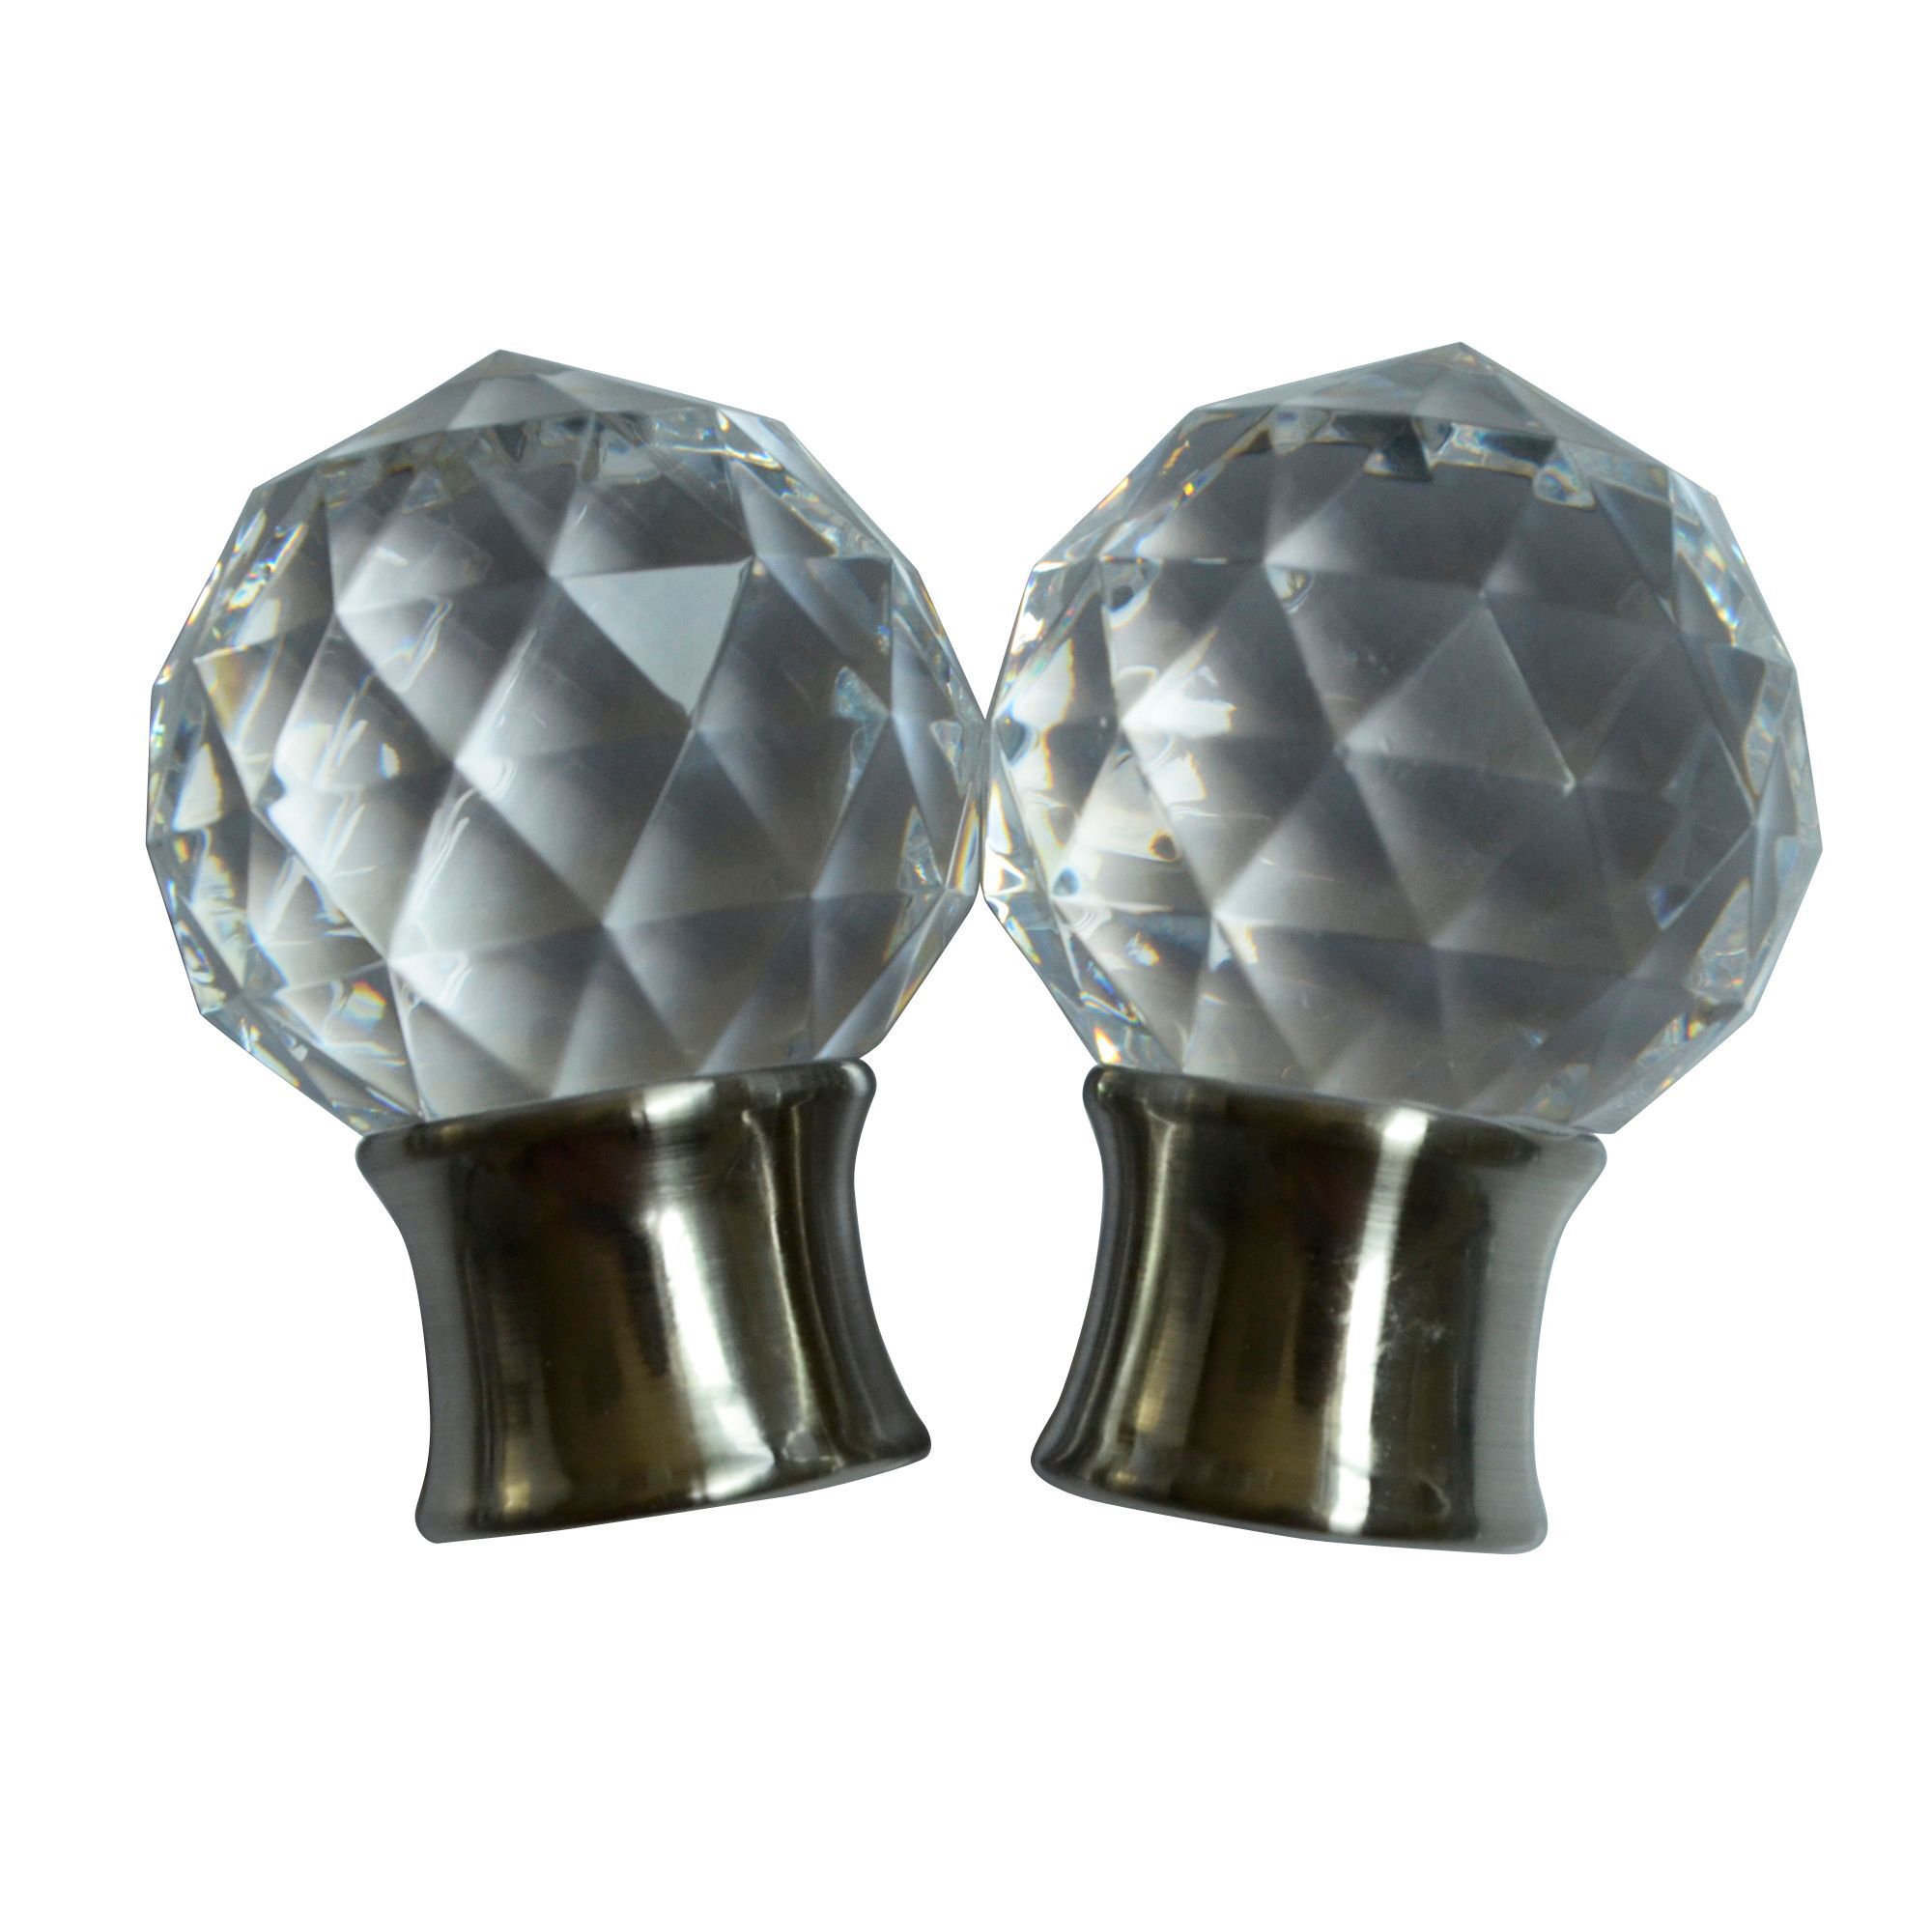 Stainless steel effect Facet Curtain pole finial, Pack of 2